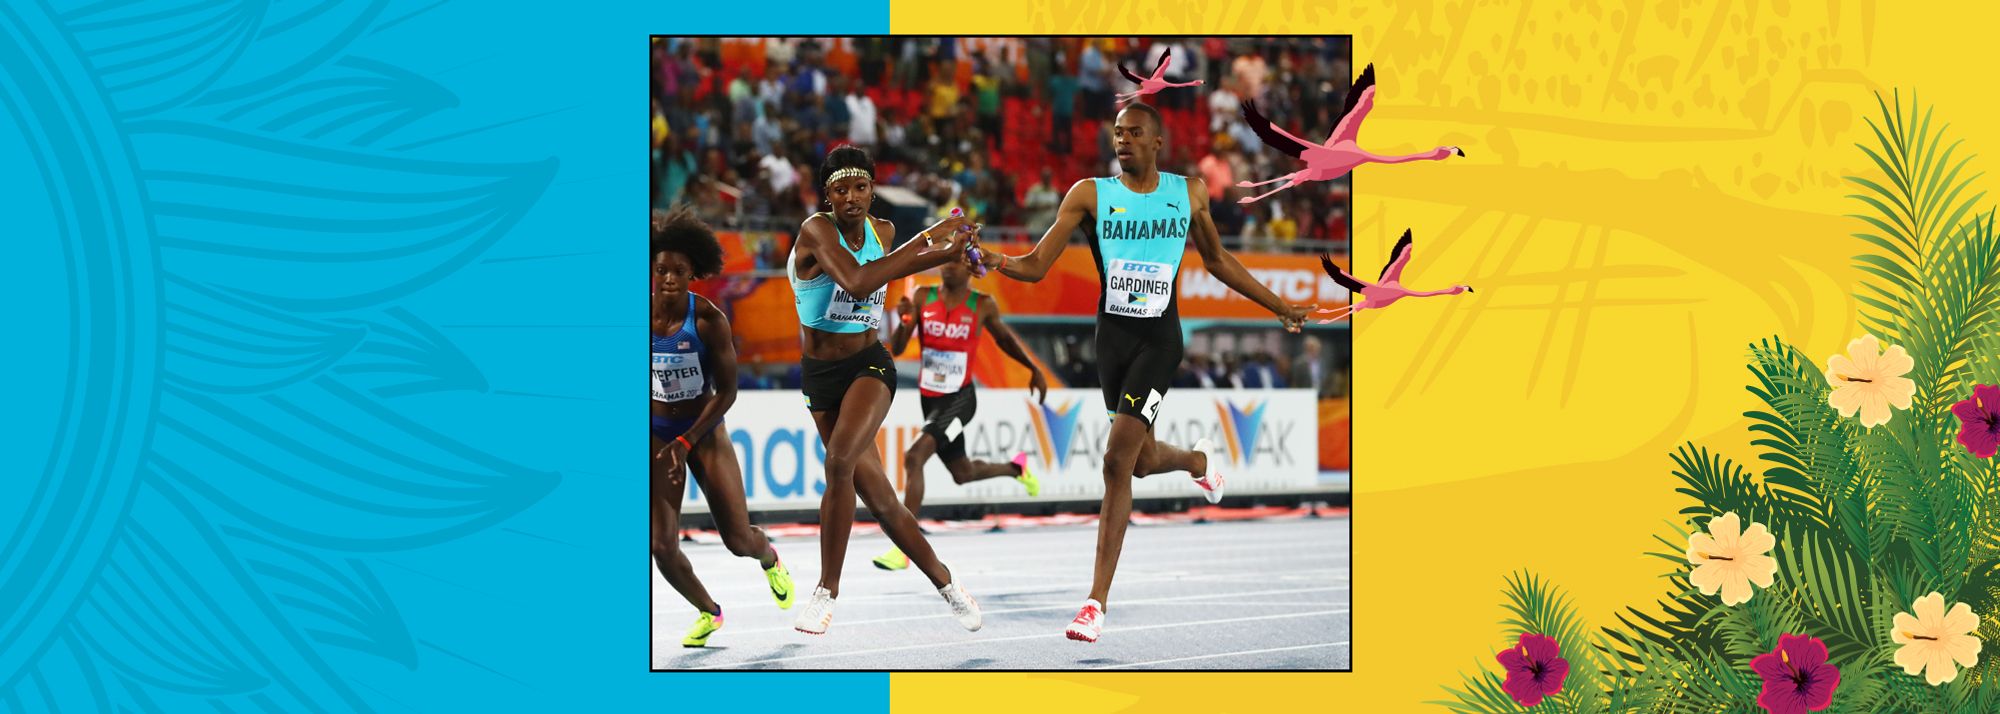 Multiple global gold medallists – including Noah Lyles, Femke Bol and Bahamian stars Shaunae Miller-Uibo, Steven Gardiner and Devynne Charlton – will be among the athletes in action at the World Athletics Relays Bahamas 24 on 4-5 May